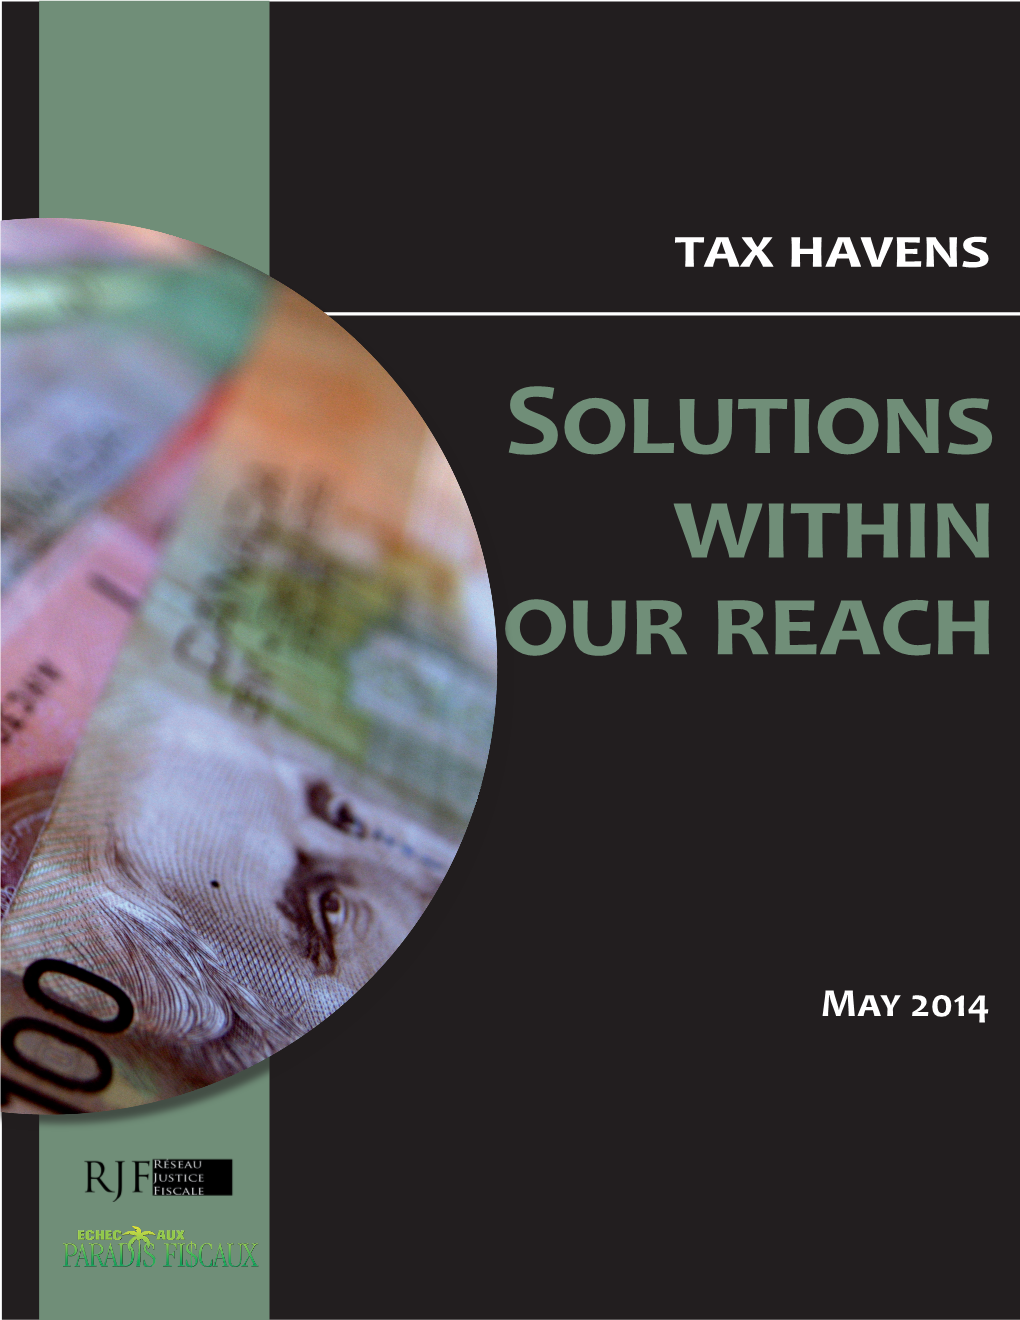 Tax Havens Solutions Within Our Reach